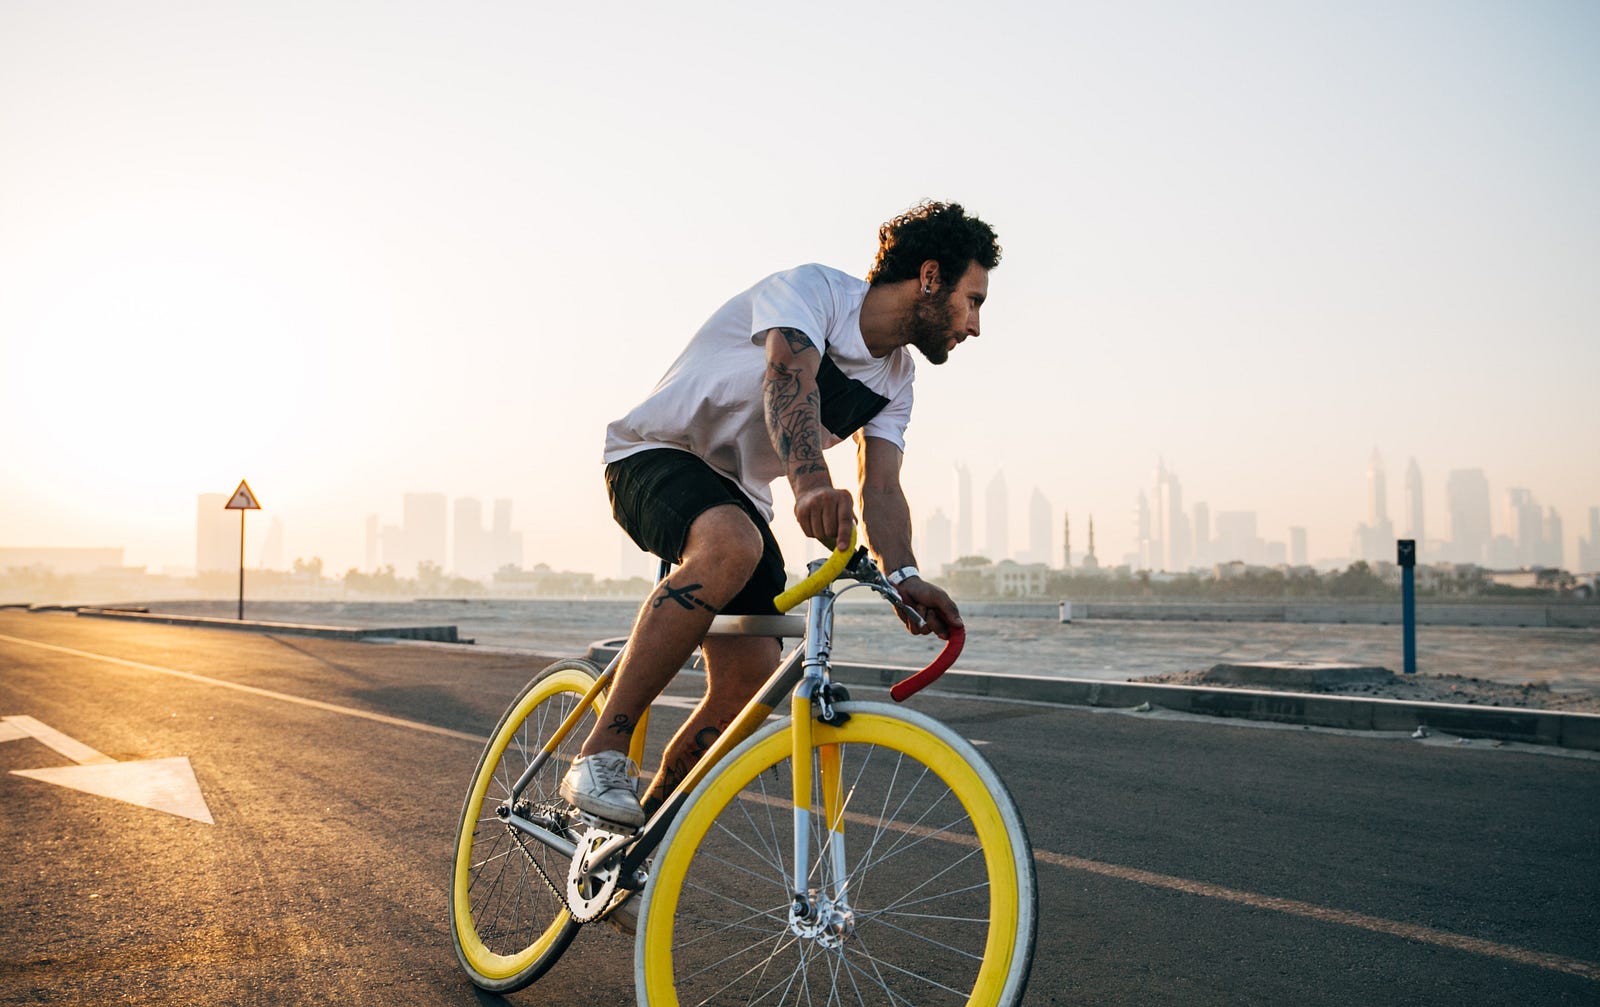 A man rides a racing bicycle with yellow tire rims.